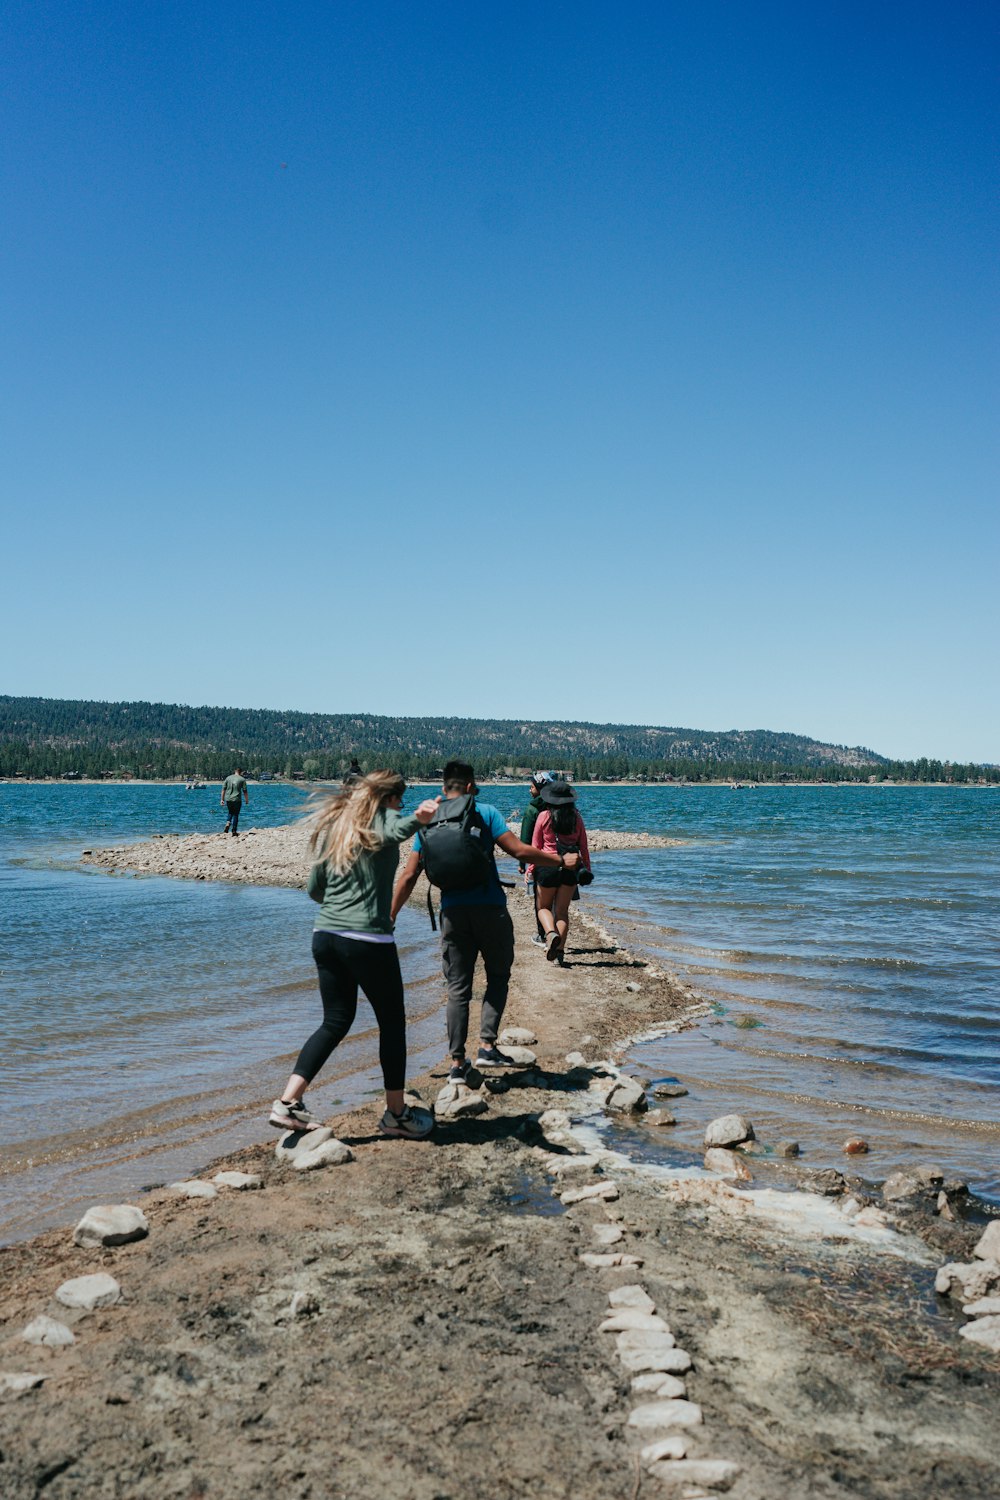 people standing on brown rock near body of water during daytime